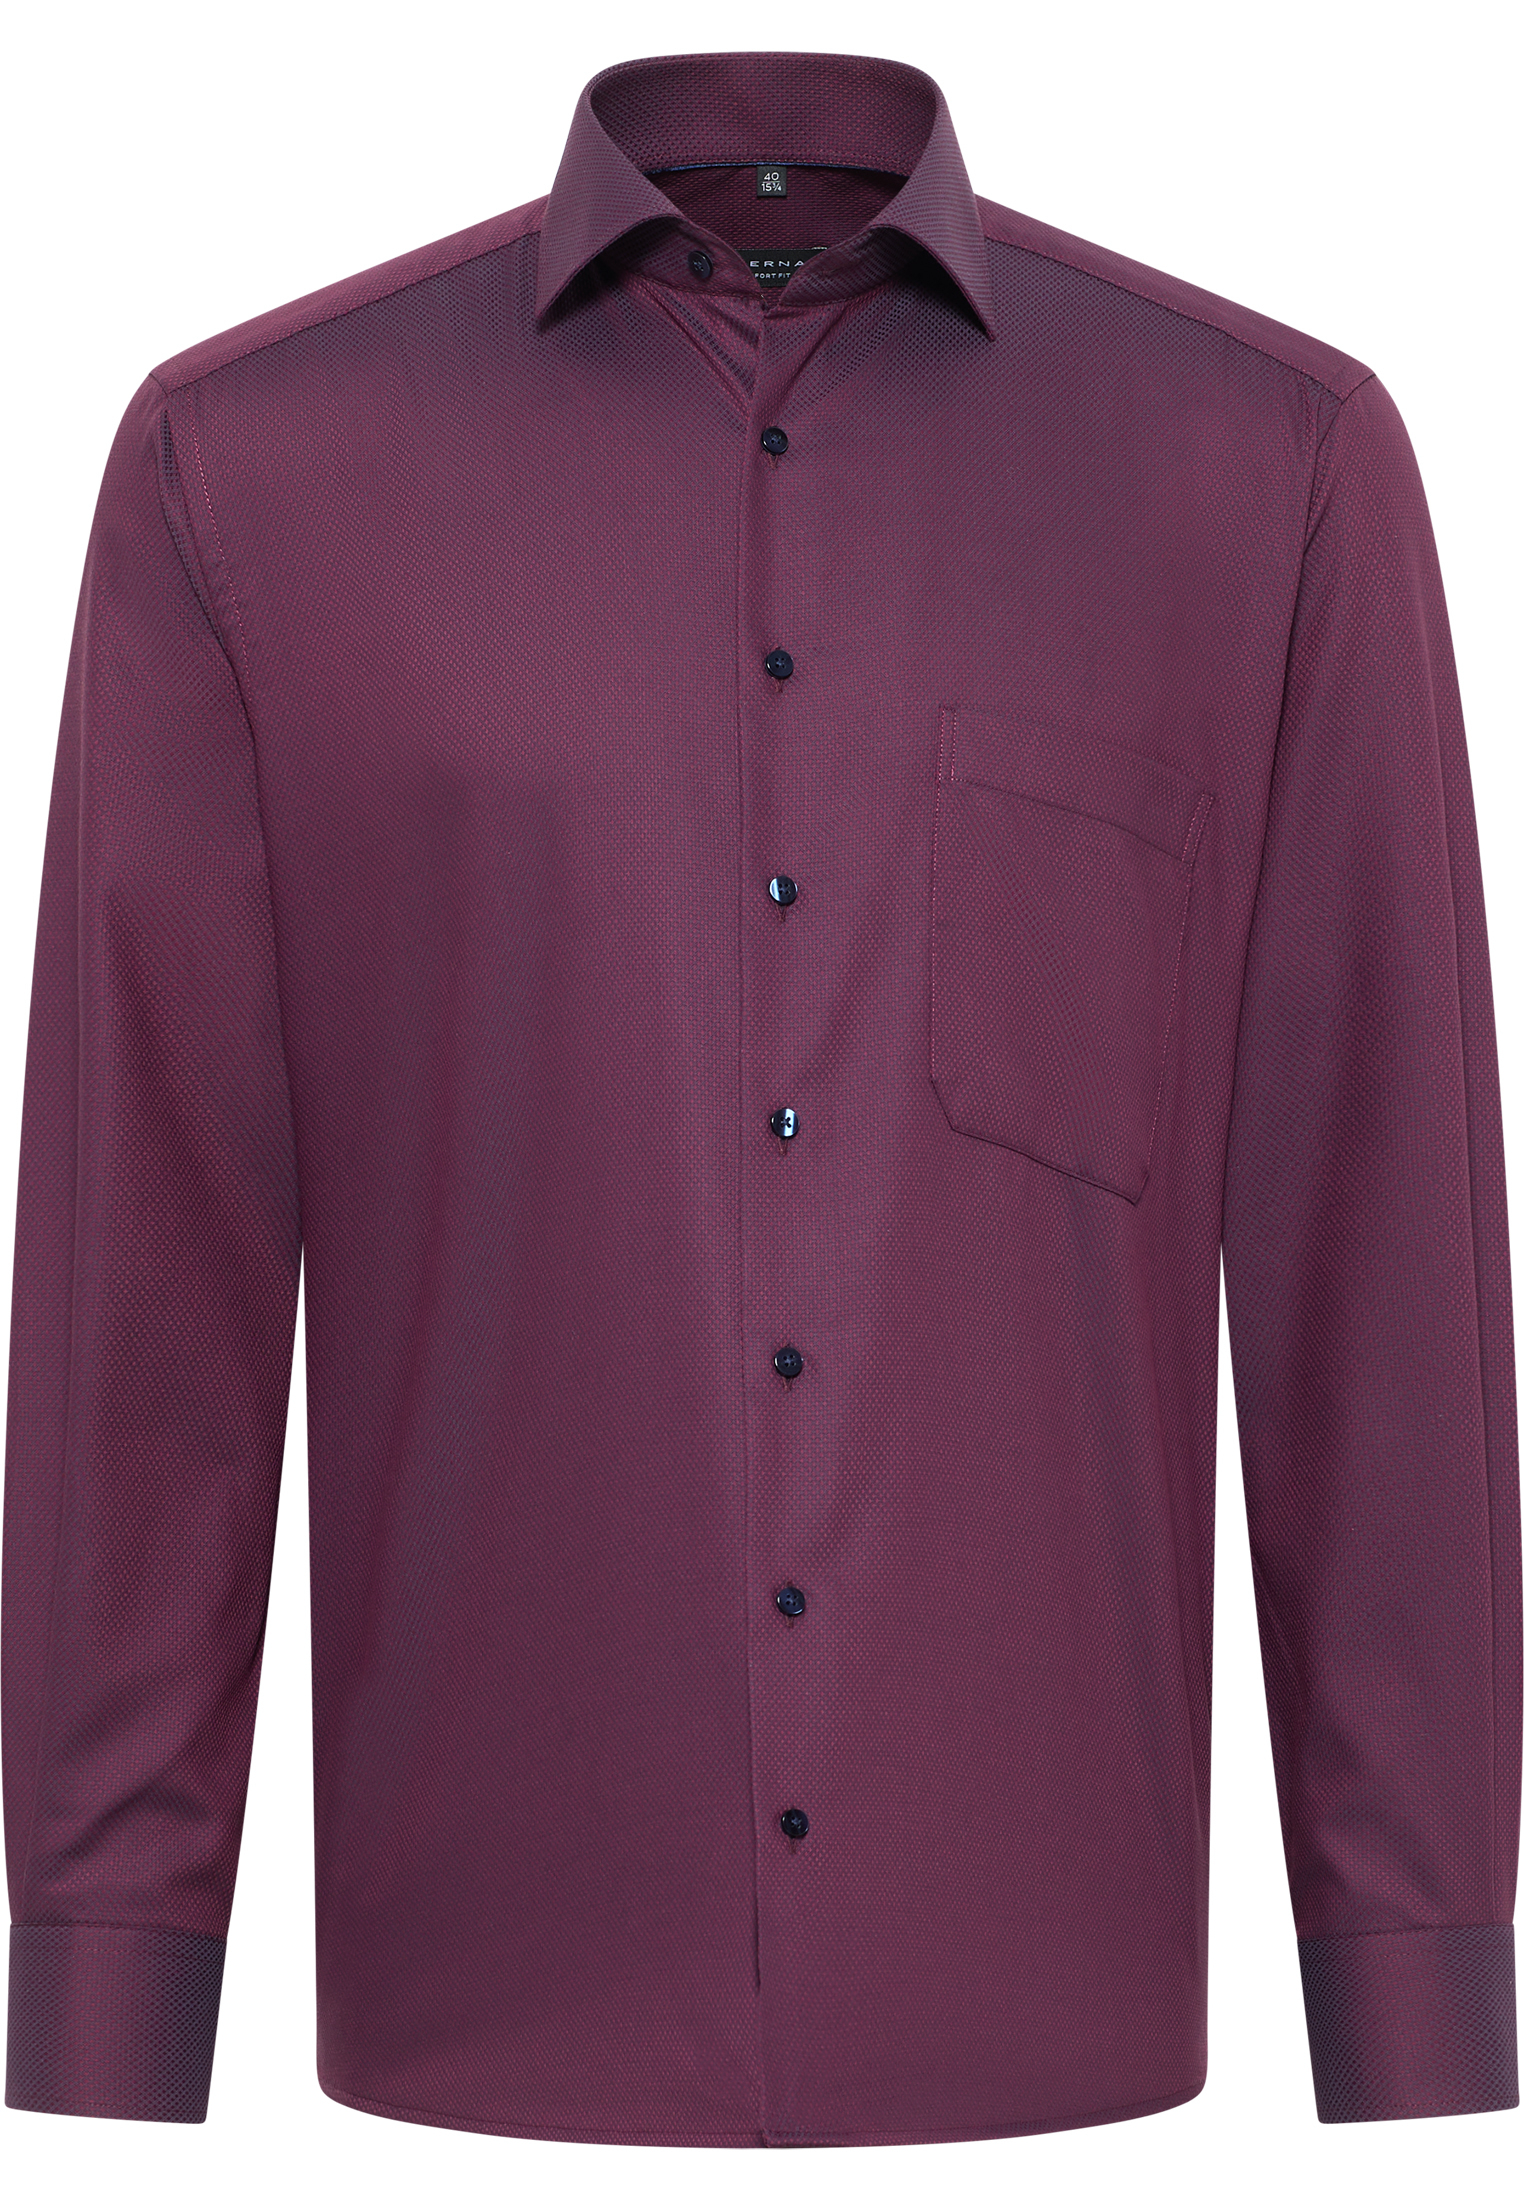 COMFORT FIT Shirt in bordeaux structured